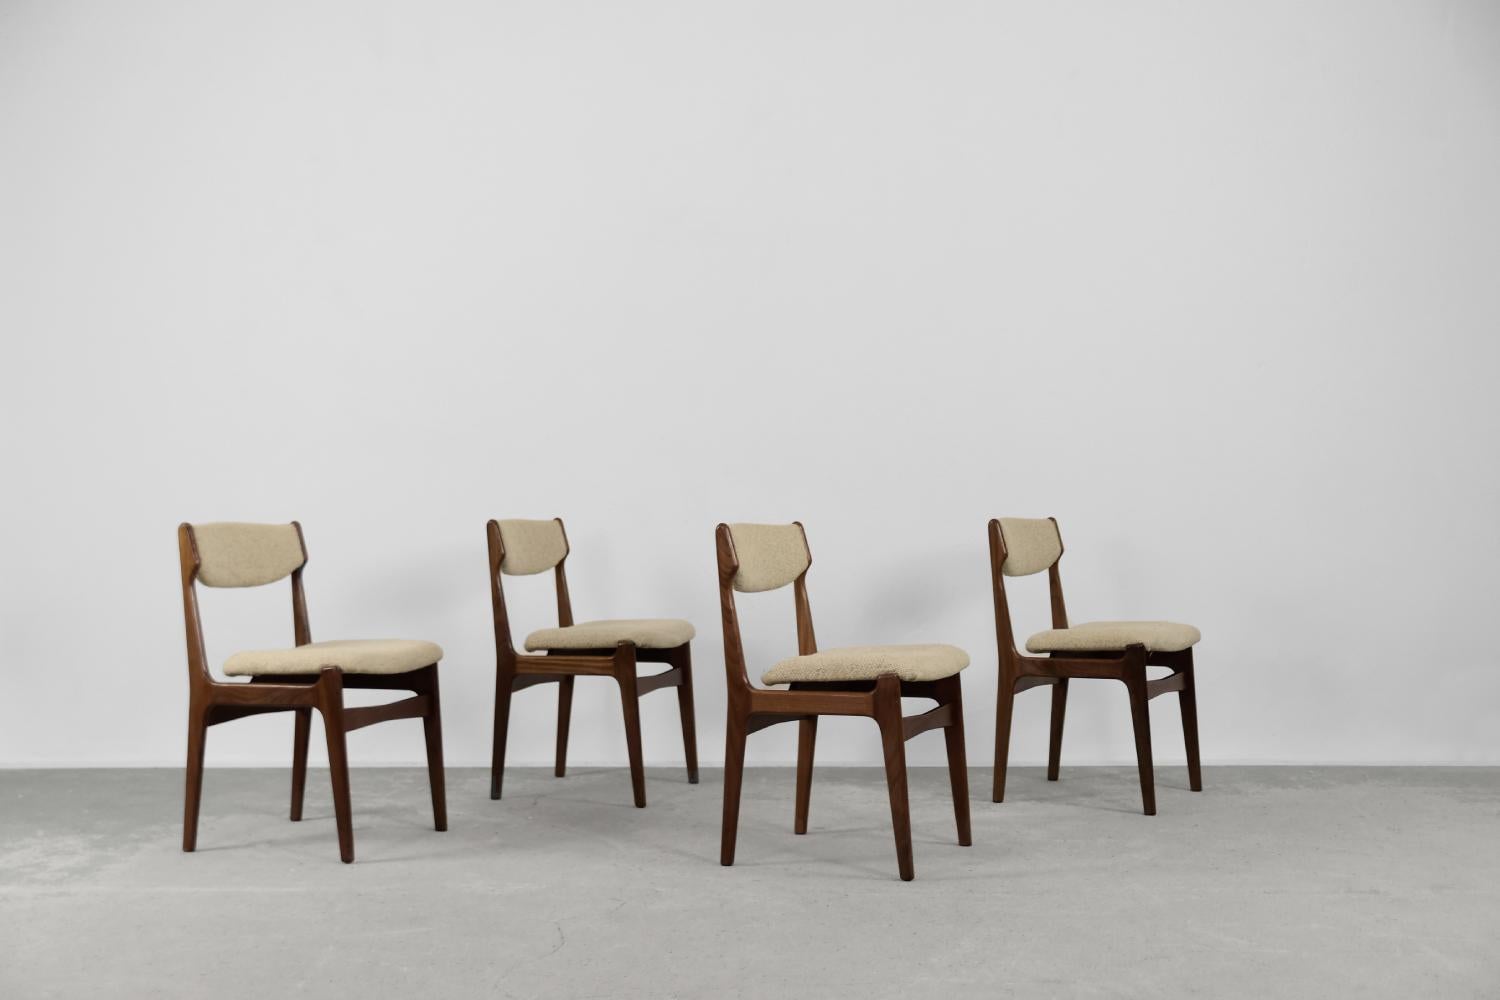 This set of four elegant chairs was produced in Denmark during the 1960s. They are made of solid teak wood in a dark shade of brown. The seat and the backrest are upholstered with high-quality thick beige wool fabric. The chairs are a perfect